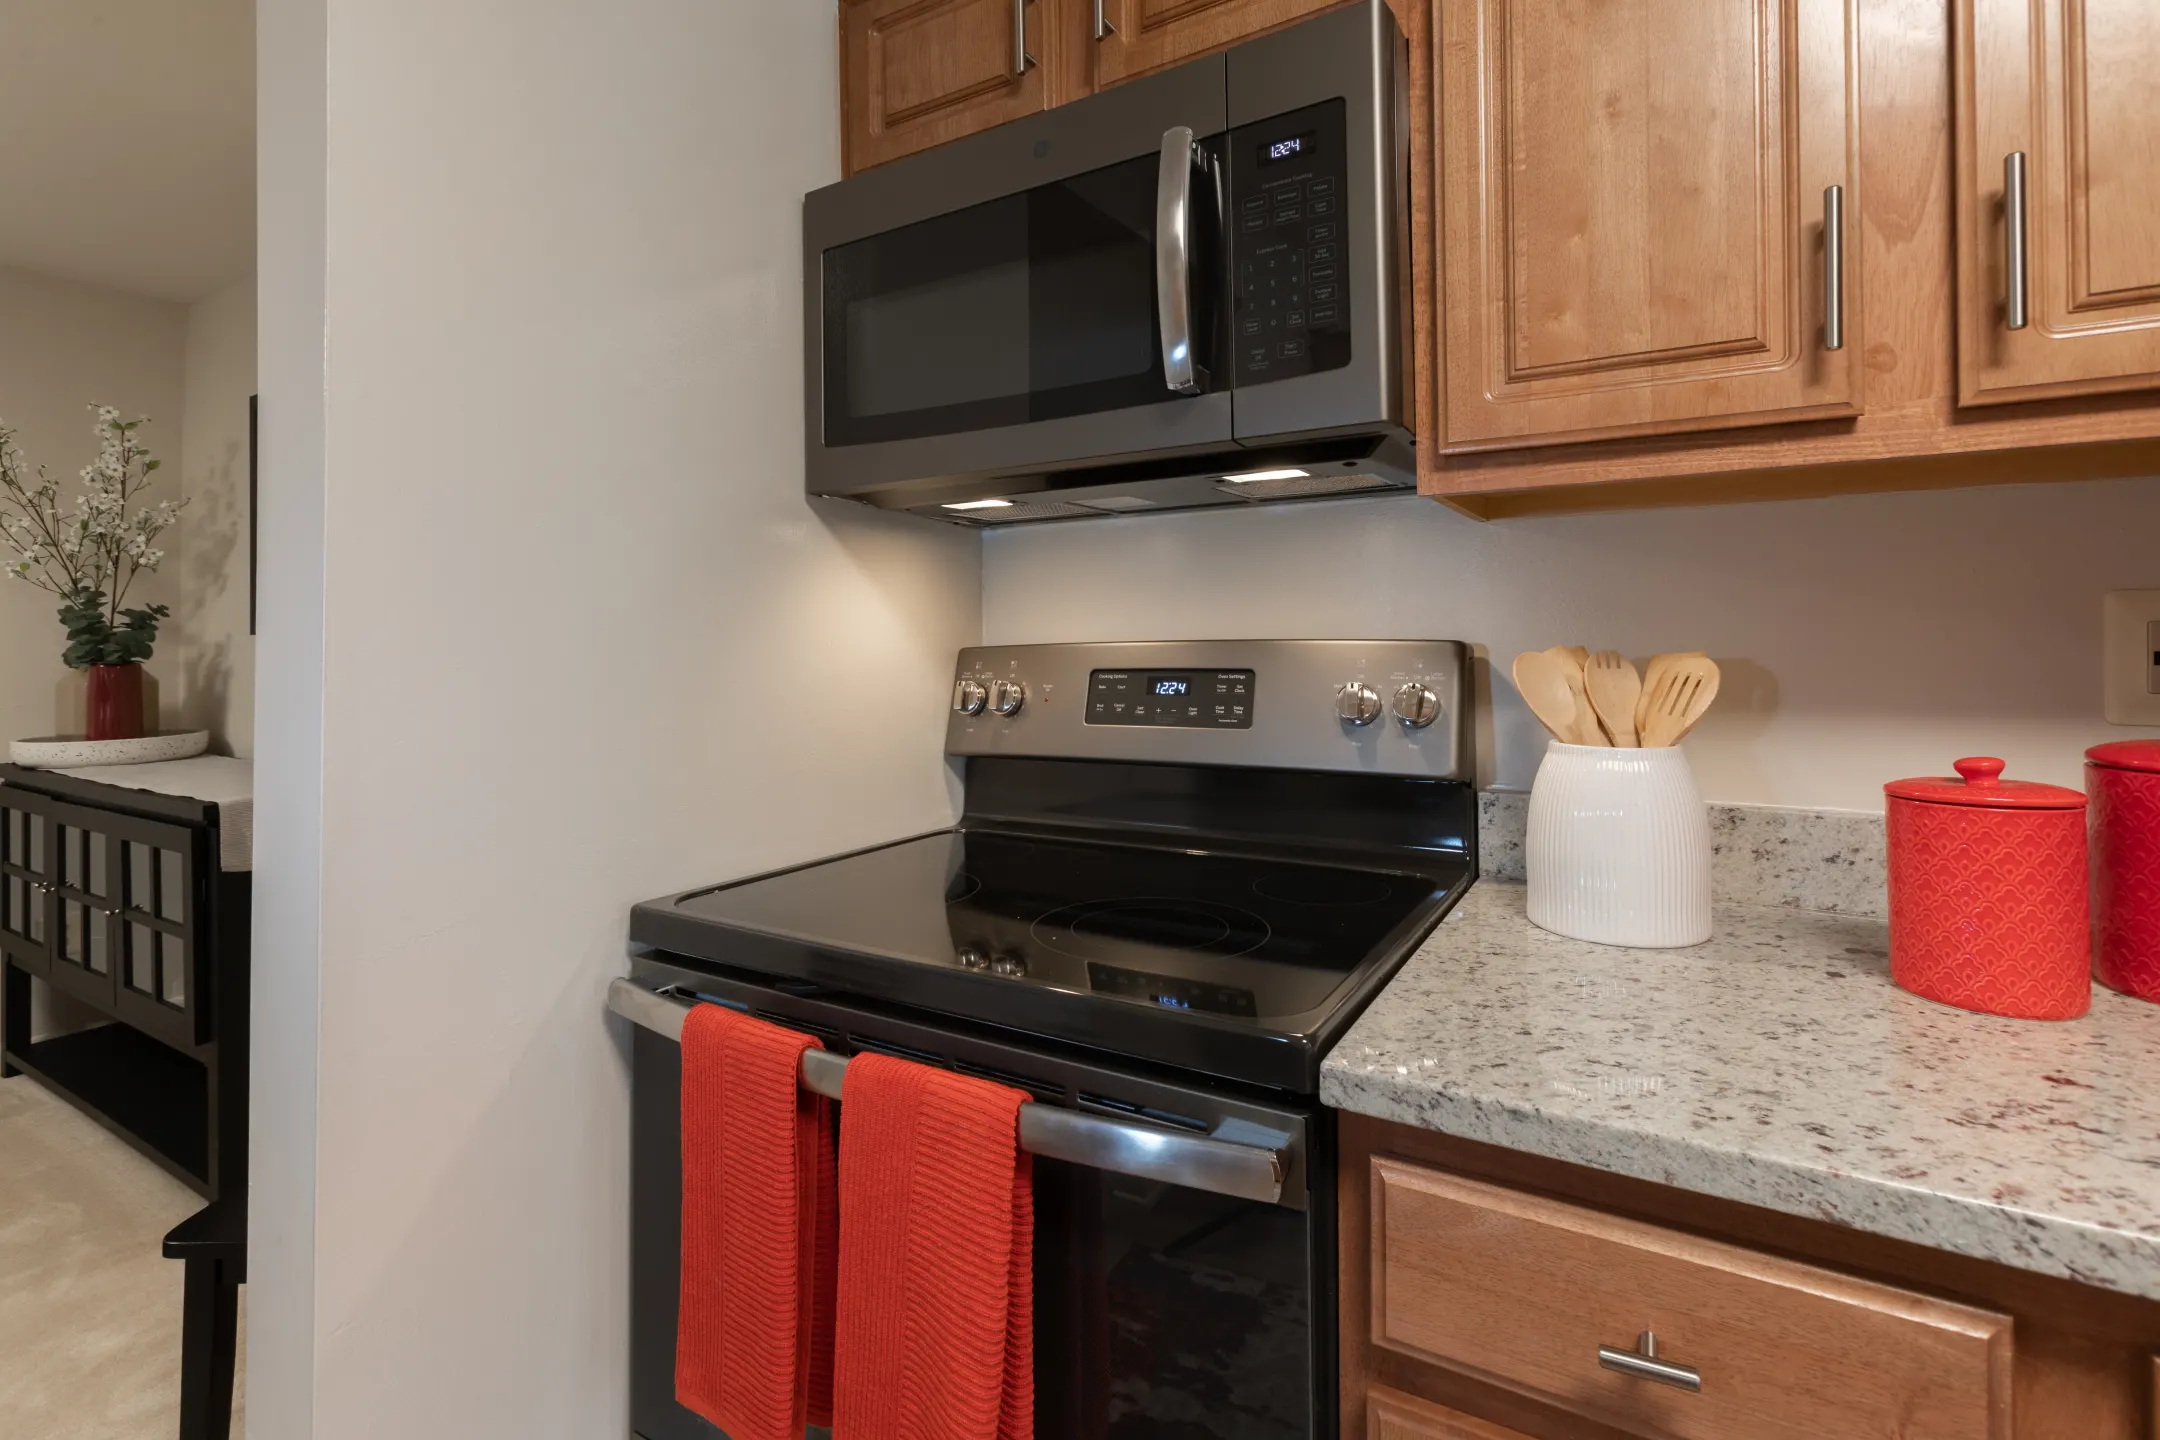 Kitchen - Cromwell Valley Apartments - Towson, MD